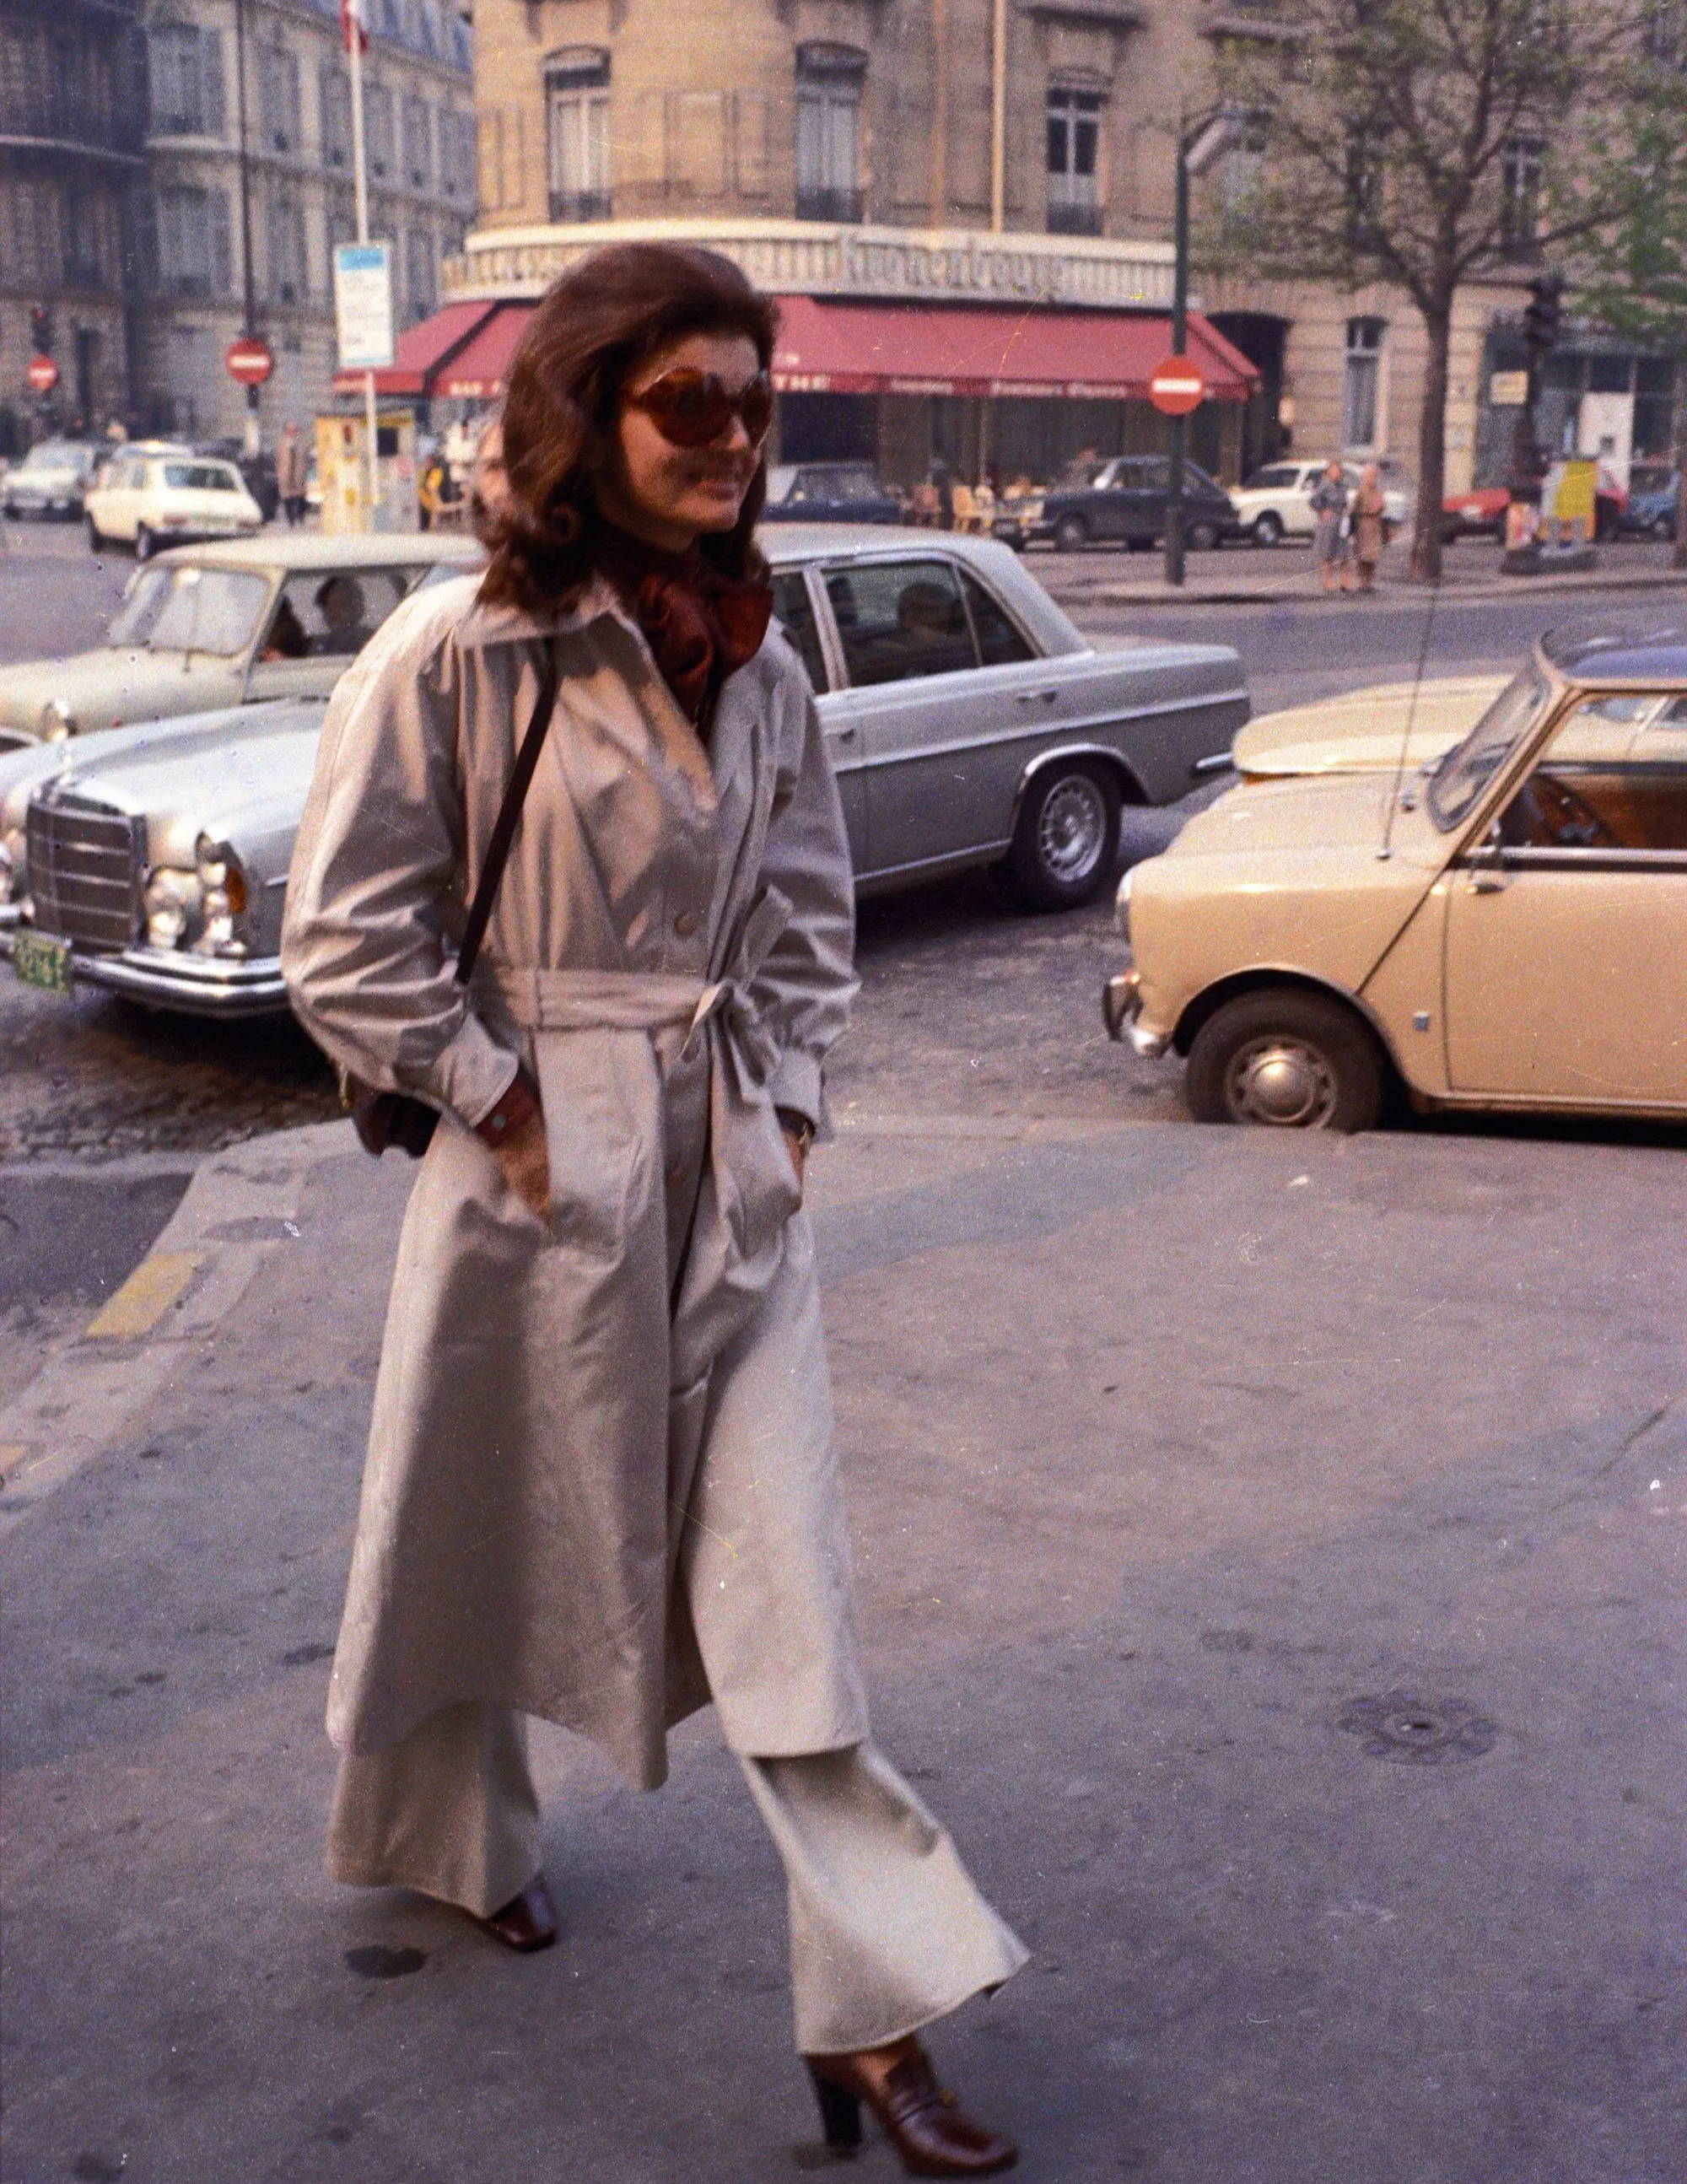 Jackie O's Timeless, Classic Style - And How To Achieve It